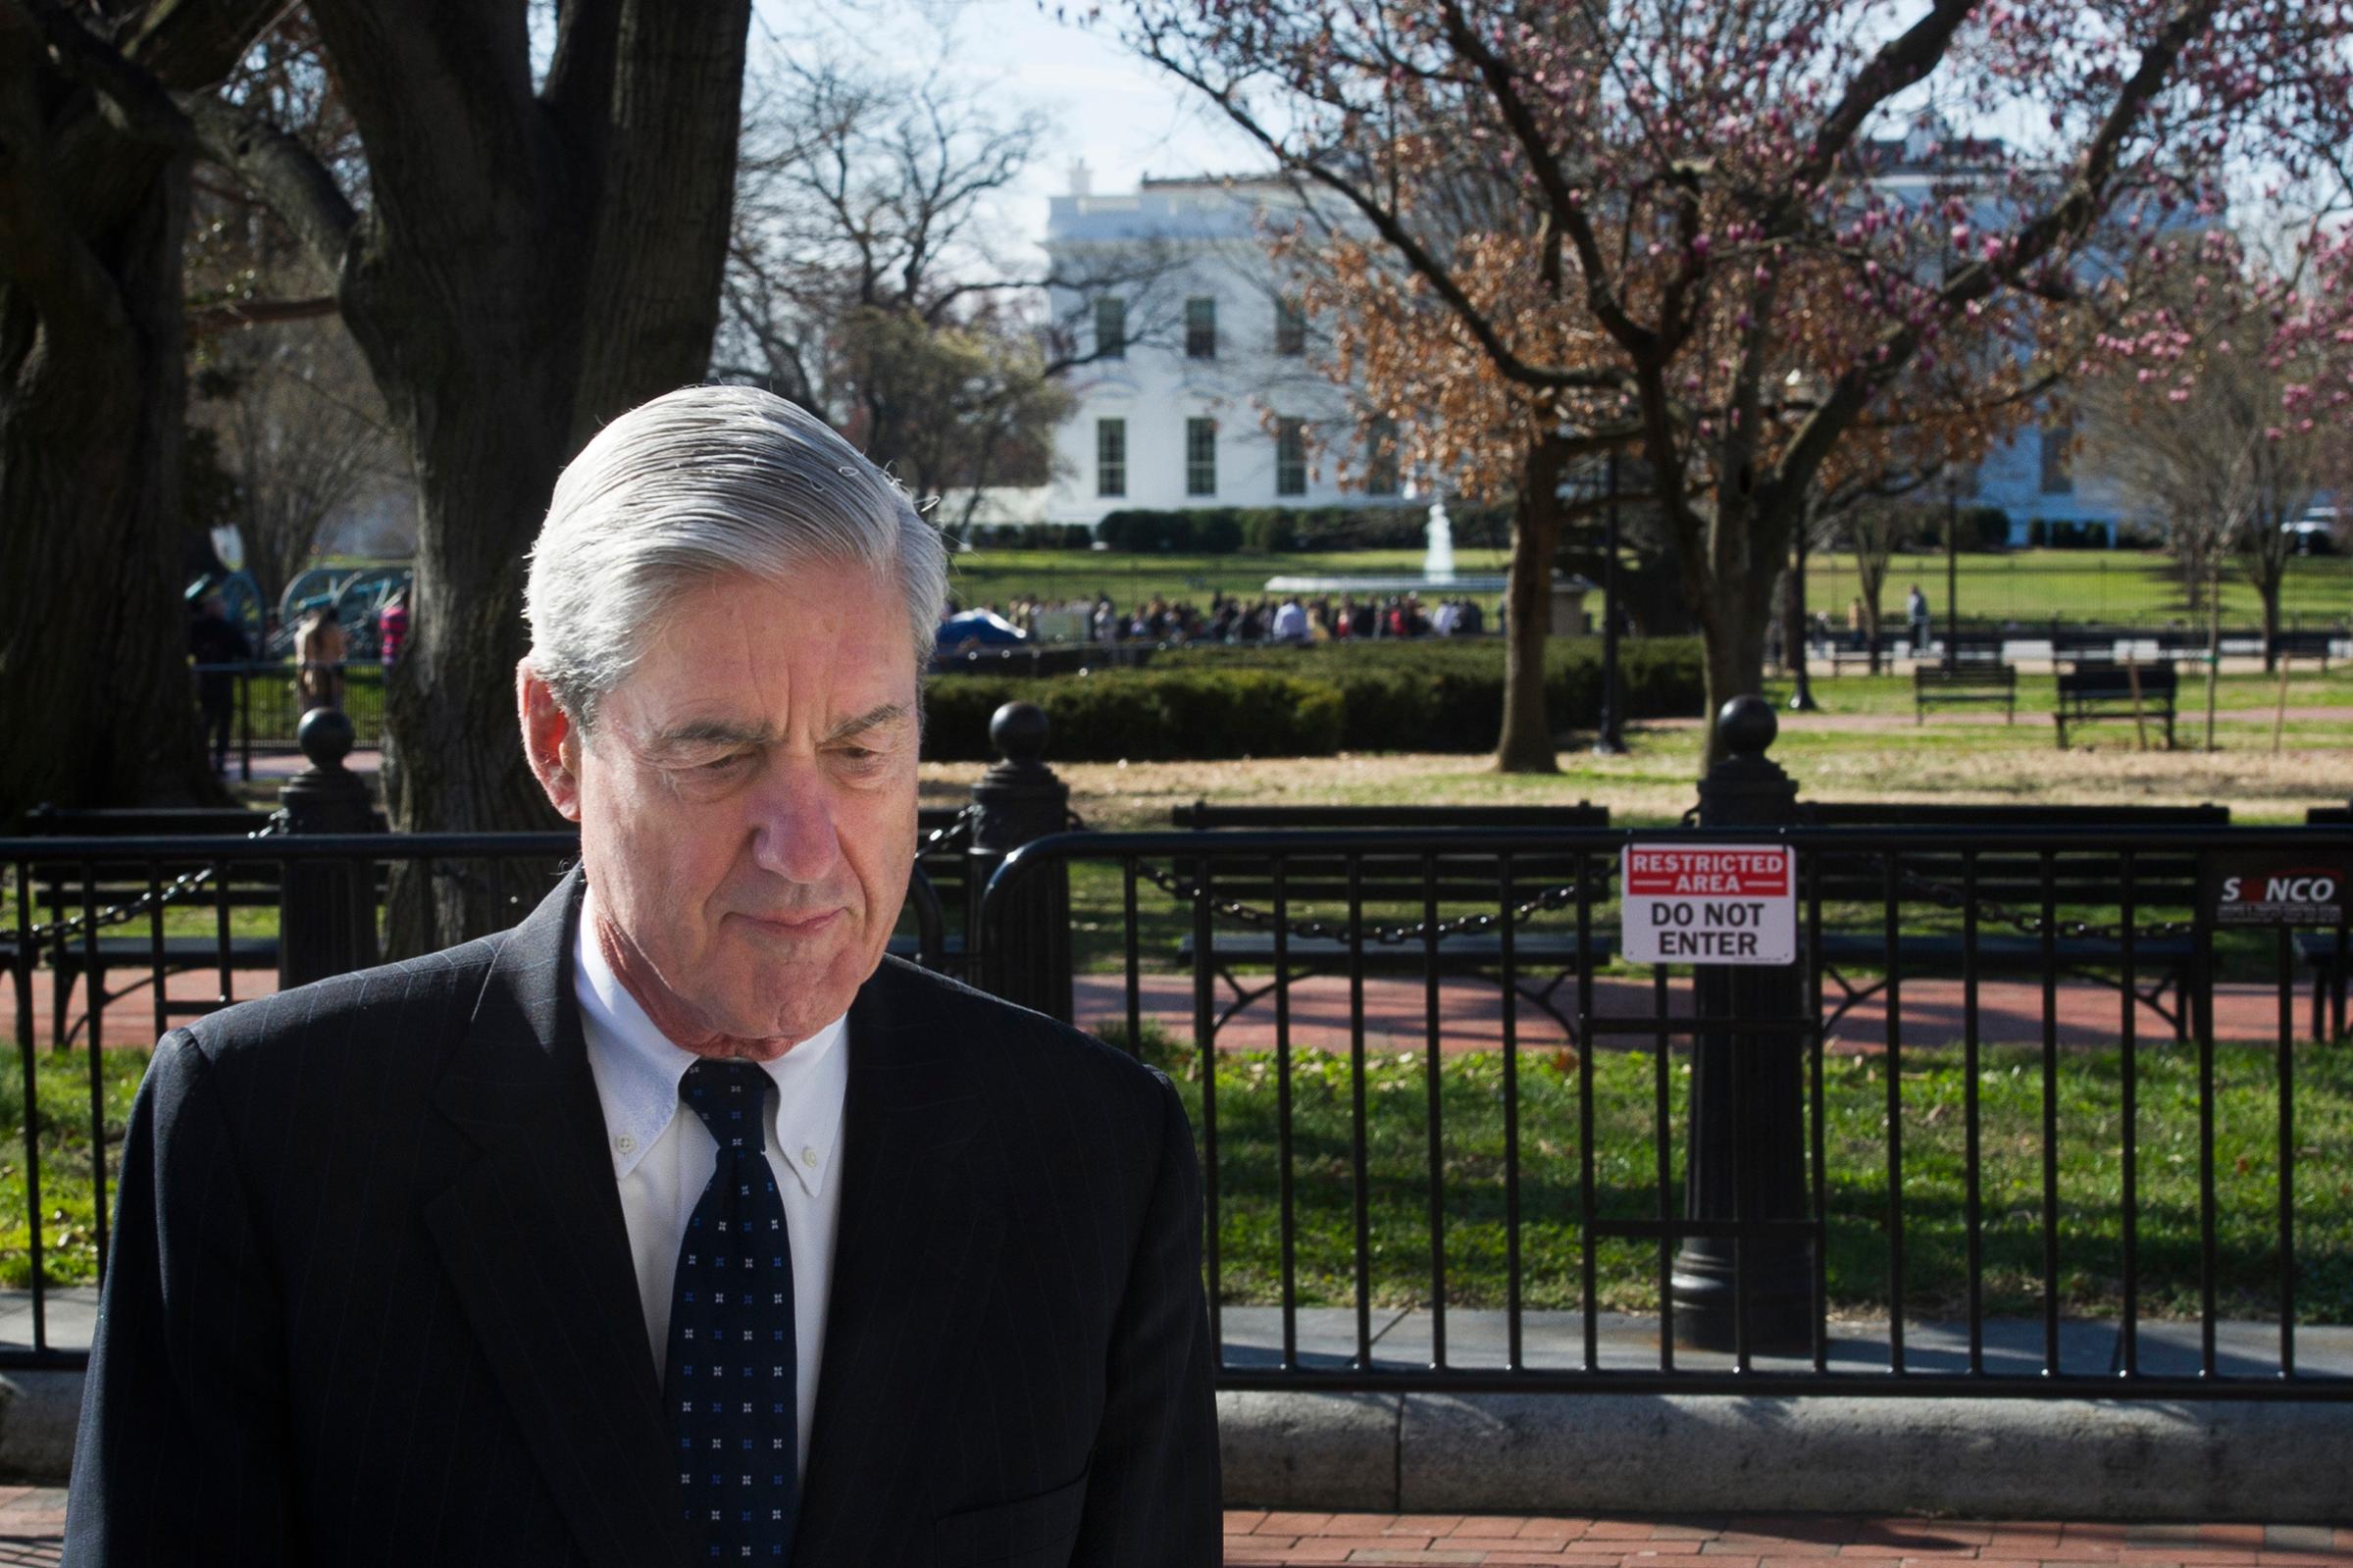 After a 22-month probe, Mueller did not find that any Trump campaign officials or associates coordinated with Russia